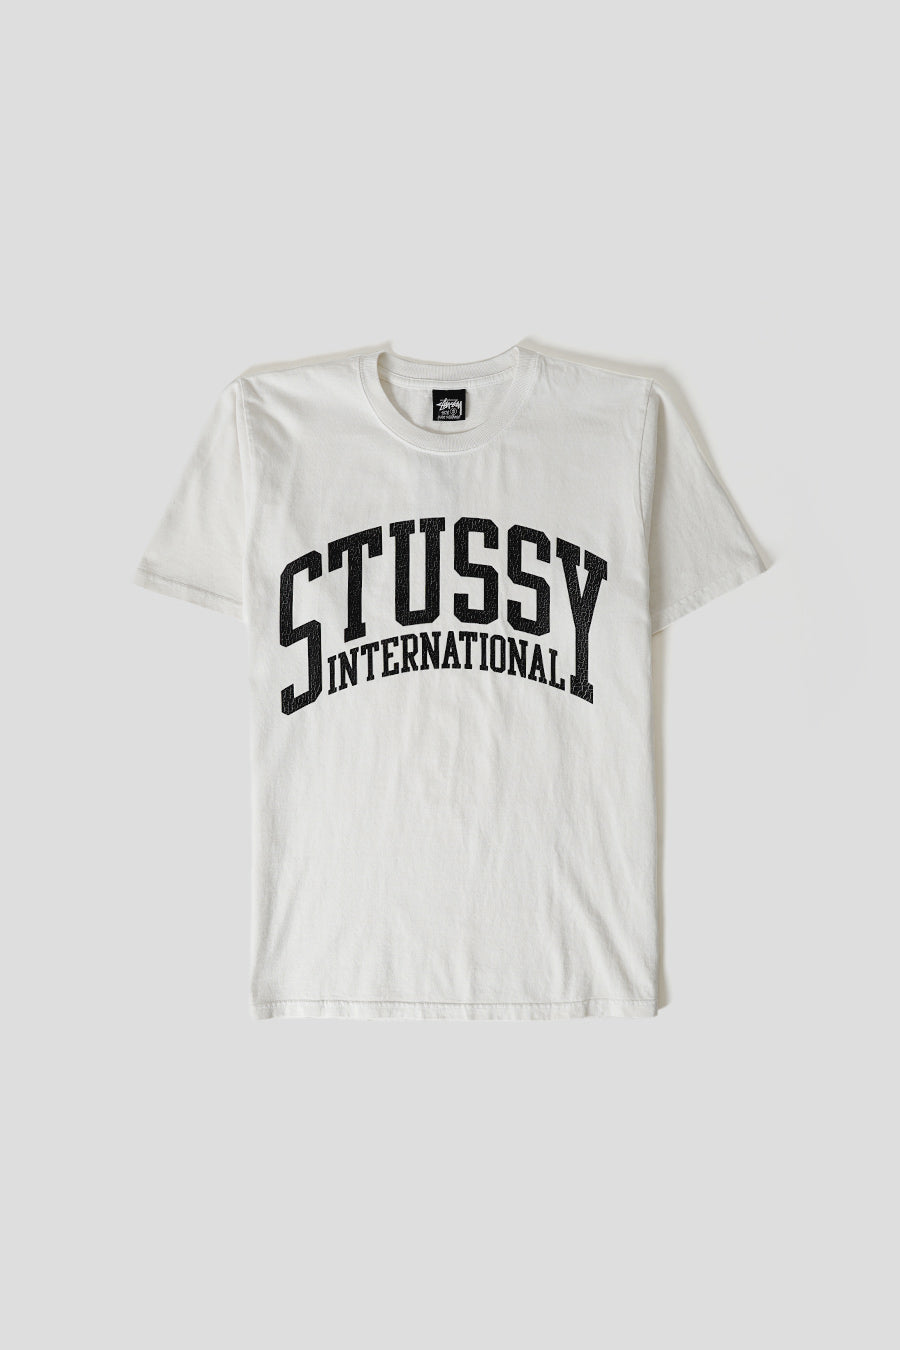 Stussy - T-SHIRT INTERNATIONAL PIG DYED NATURAL - LE LABO STORE